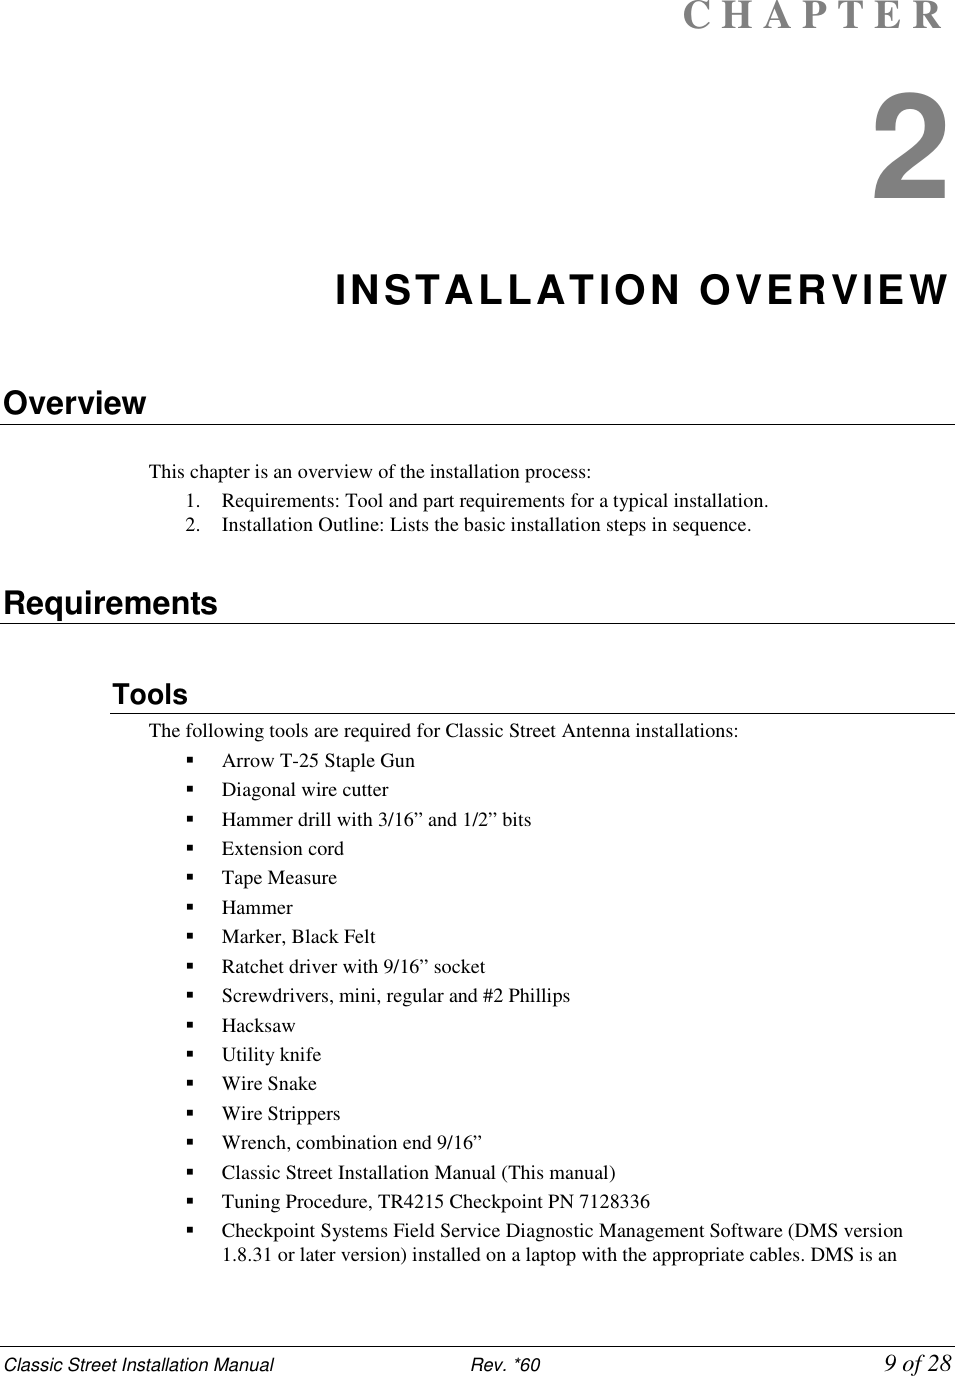 Classic Street Installation Manual                           Rev. *60             9 of 28 C H A P T E R  2 INSTALLATION OVERVIEW  Overview  This chapter is an overview of the installation process:  1. Requirements: Tool and part requirements for a typical installation.  2. Installation Outline: Lists the basic installation steps in sequence.   Requirements  Tools  The following tools are required for Classic Street Antenna installations:  Arrow T-25 Staple Gun  Diagonal wire cutter   Hammer drill with 3/16” and 1/2” bits  Extension cord   Tape Measure  Hammer   Marker, Black Felt   Ratchet driver with 9/16” socket  Screwdrivers, mini, regular and #2 Phillips   Hacksaw  Utility knife  Wire Snake  Wire Strippers   Wrench, combination end 9/16”  Classic Street Installation Manual (This manual)  Tuning Procedure, TR4215 Checkpoint PN 7128336   Checkpoint Systems Field Service Diagnostic Management Software (DMS version 1.8.31 or later version) installed on a laptop with the appropriate cables. DMS is an 